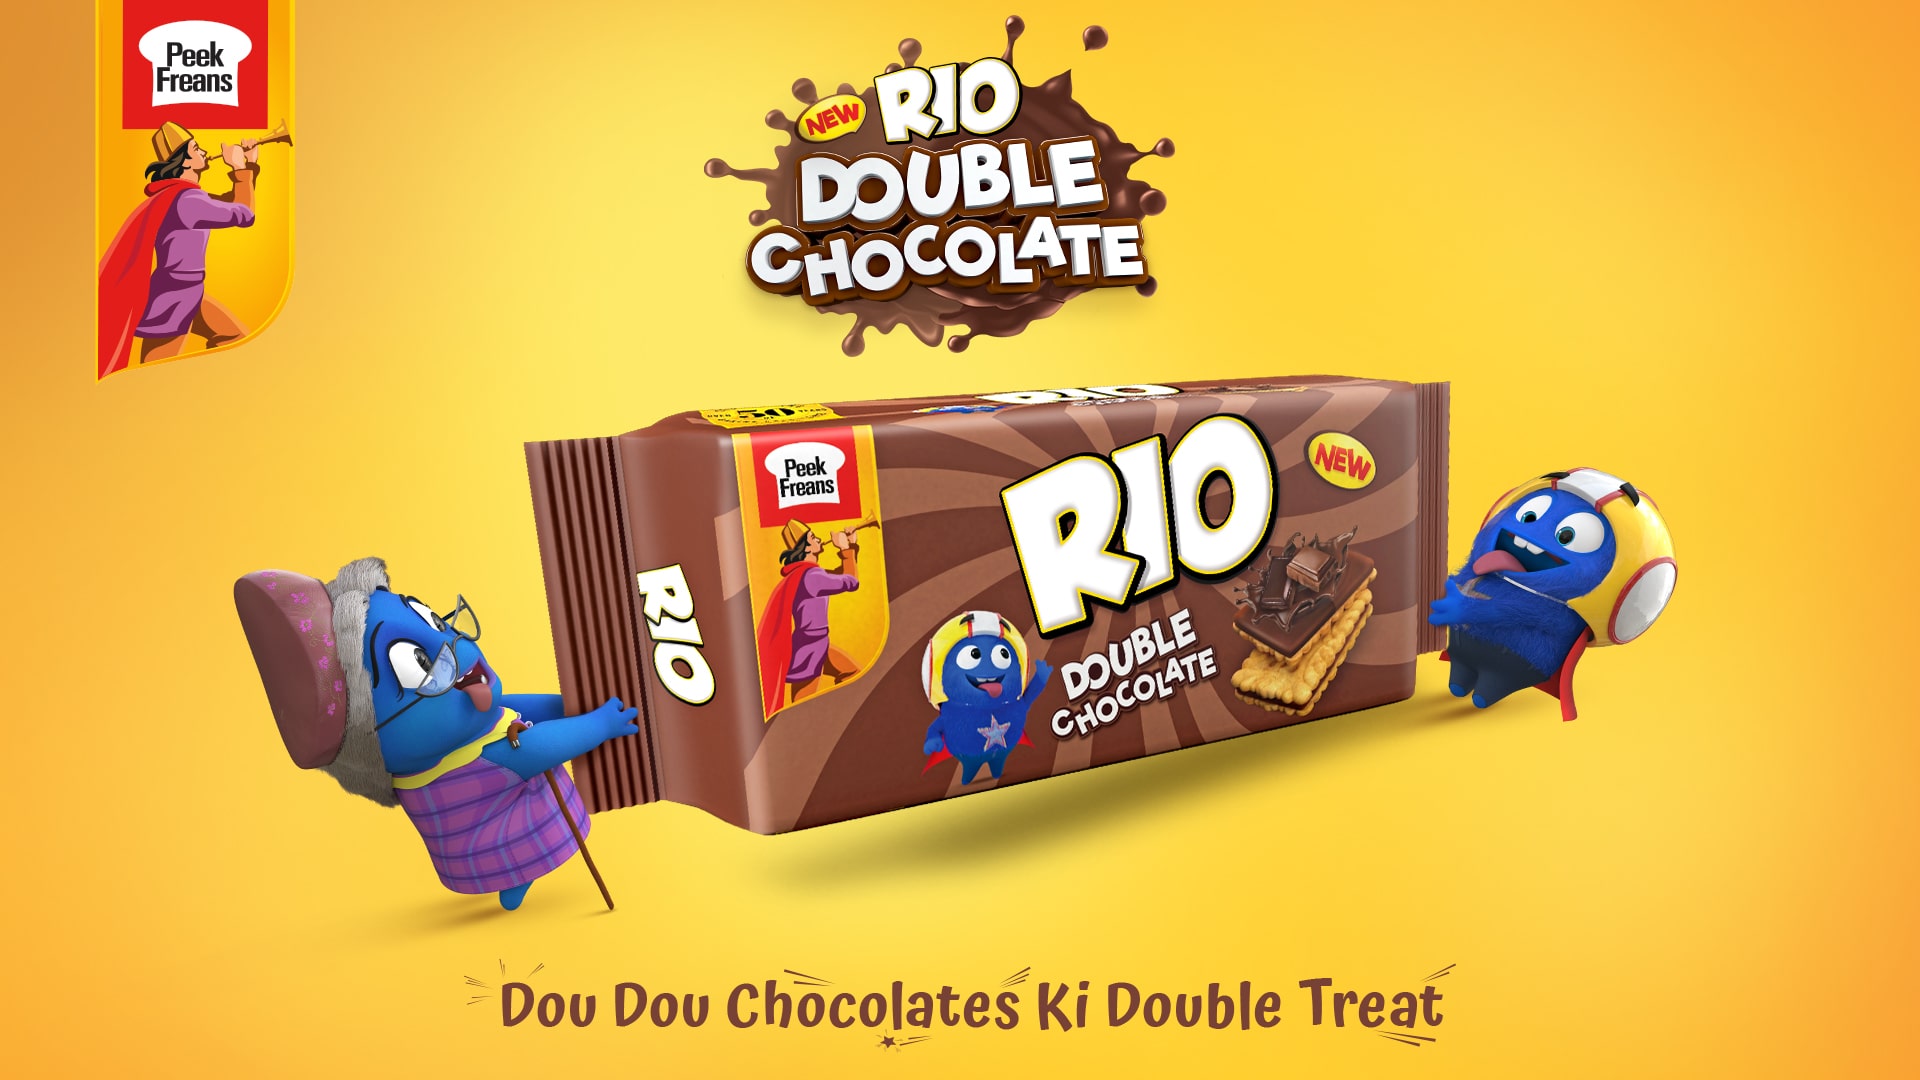 Introducing the New RIO Double Chocolate